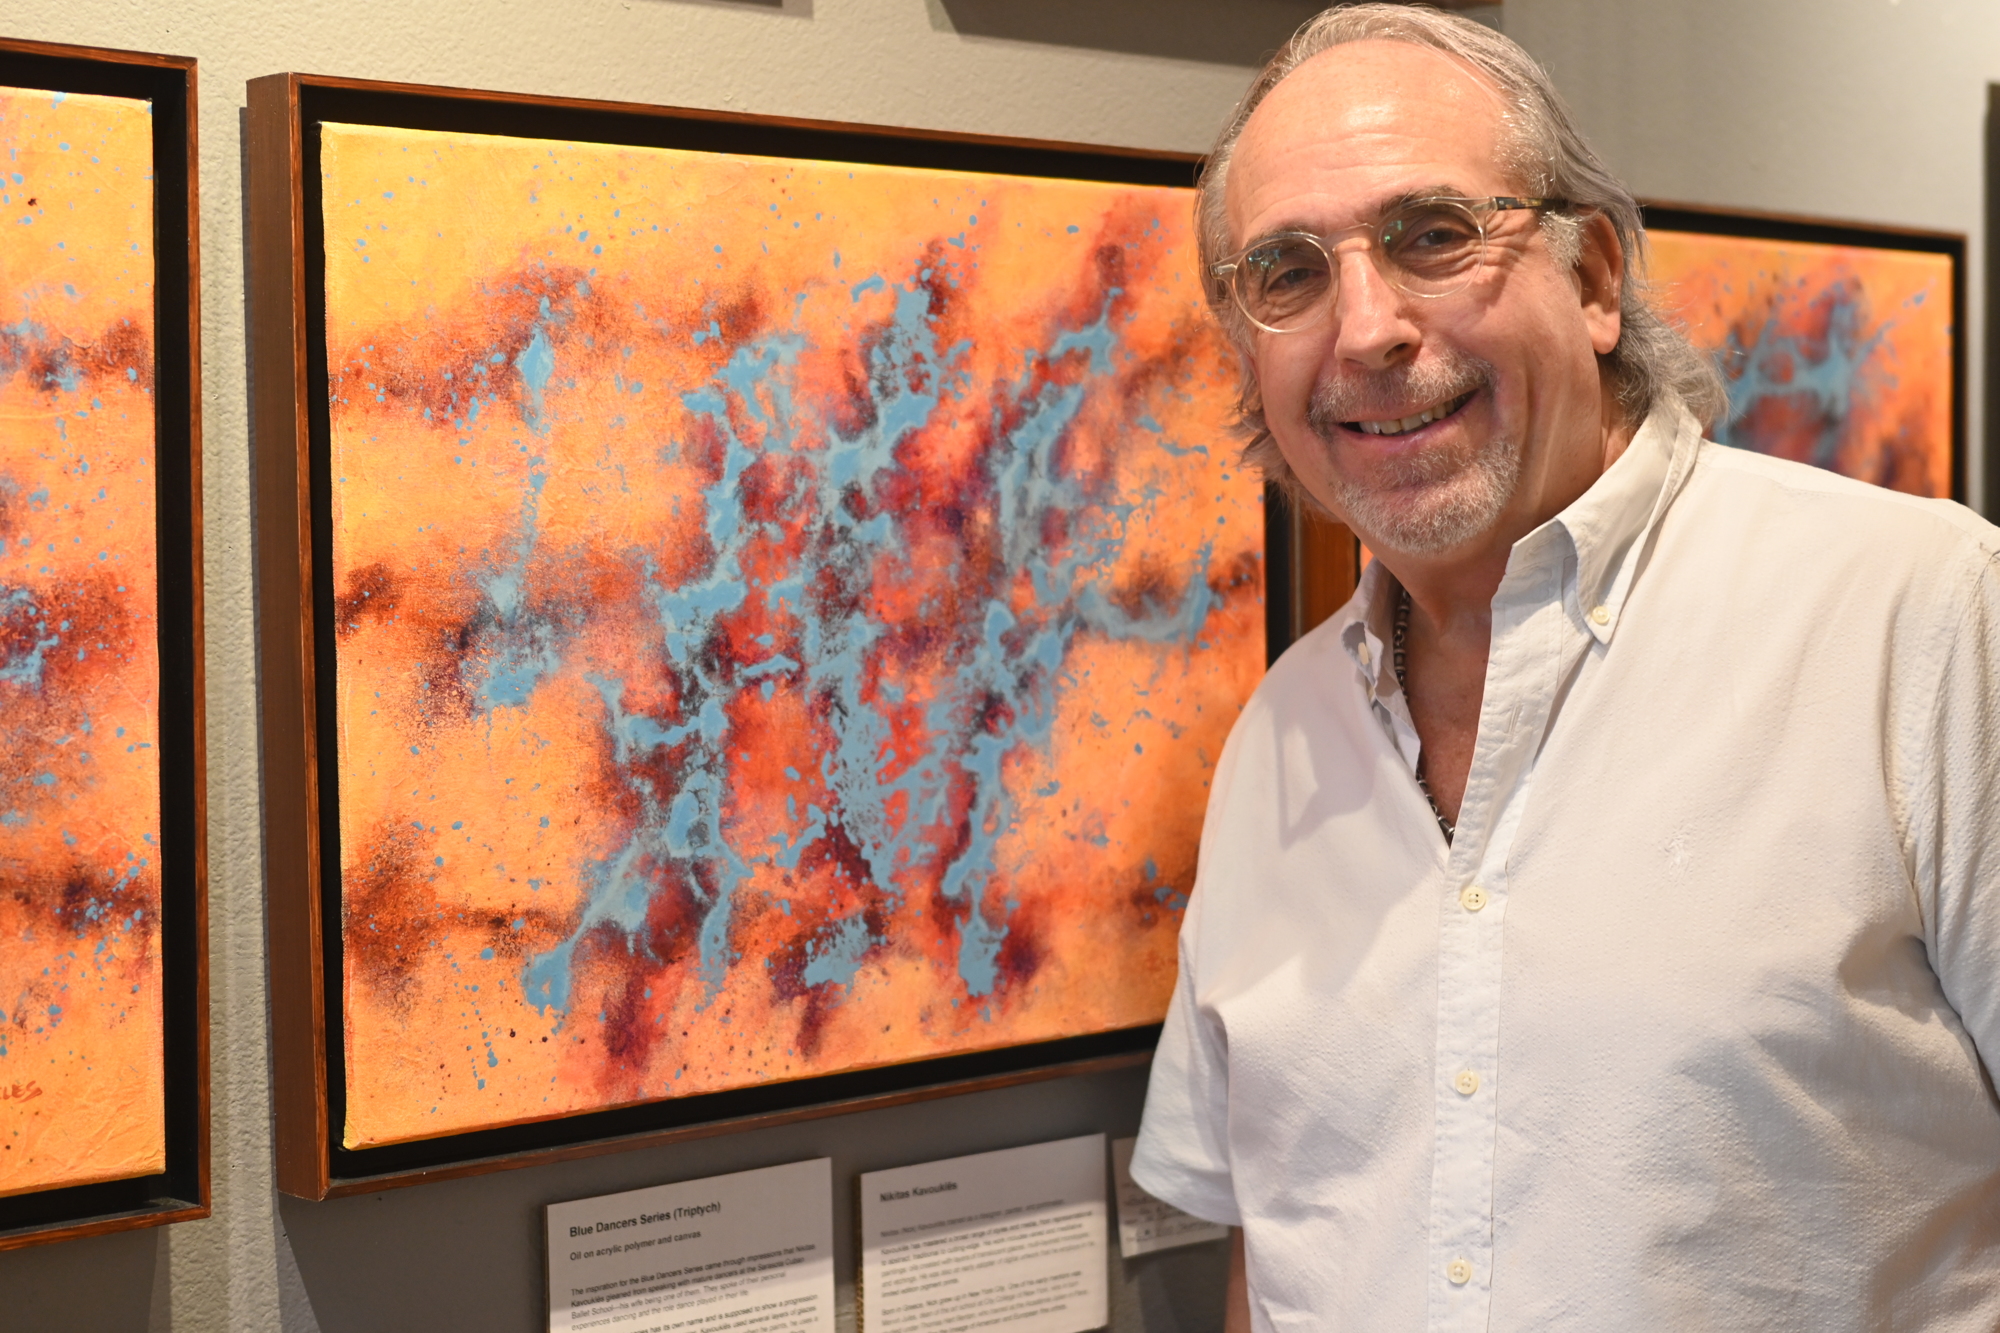 Cary Greenberg stands in front of an oil painting by Nikitas Kavoukles. (Photo by Spencer Fordin)